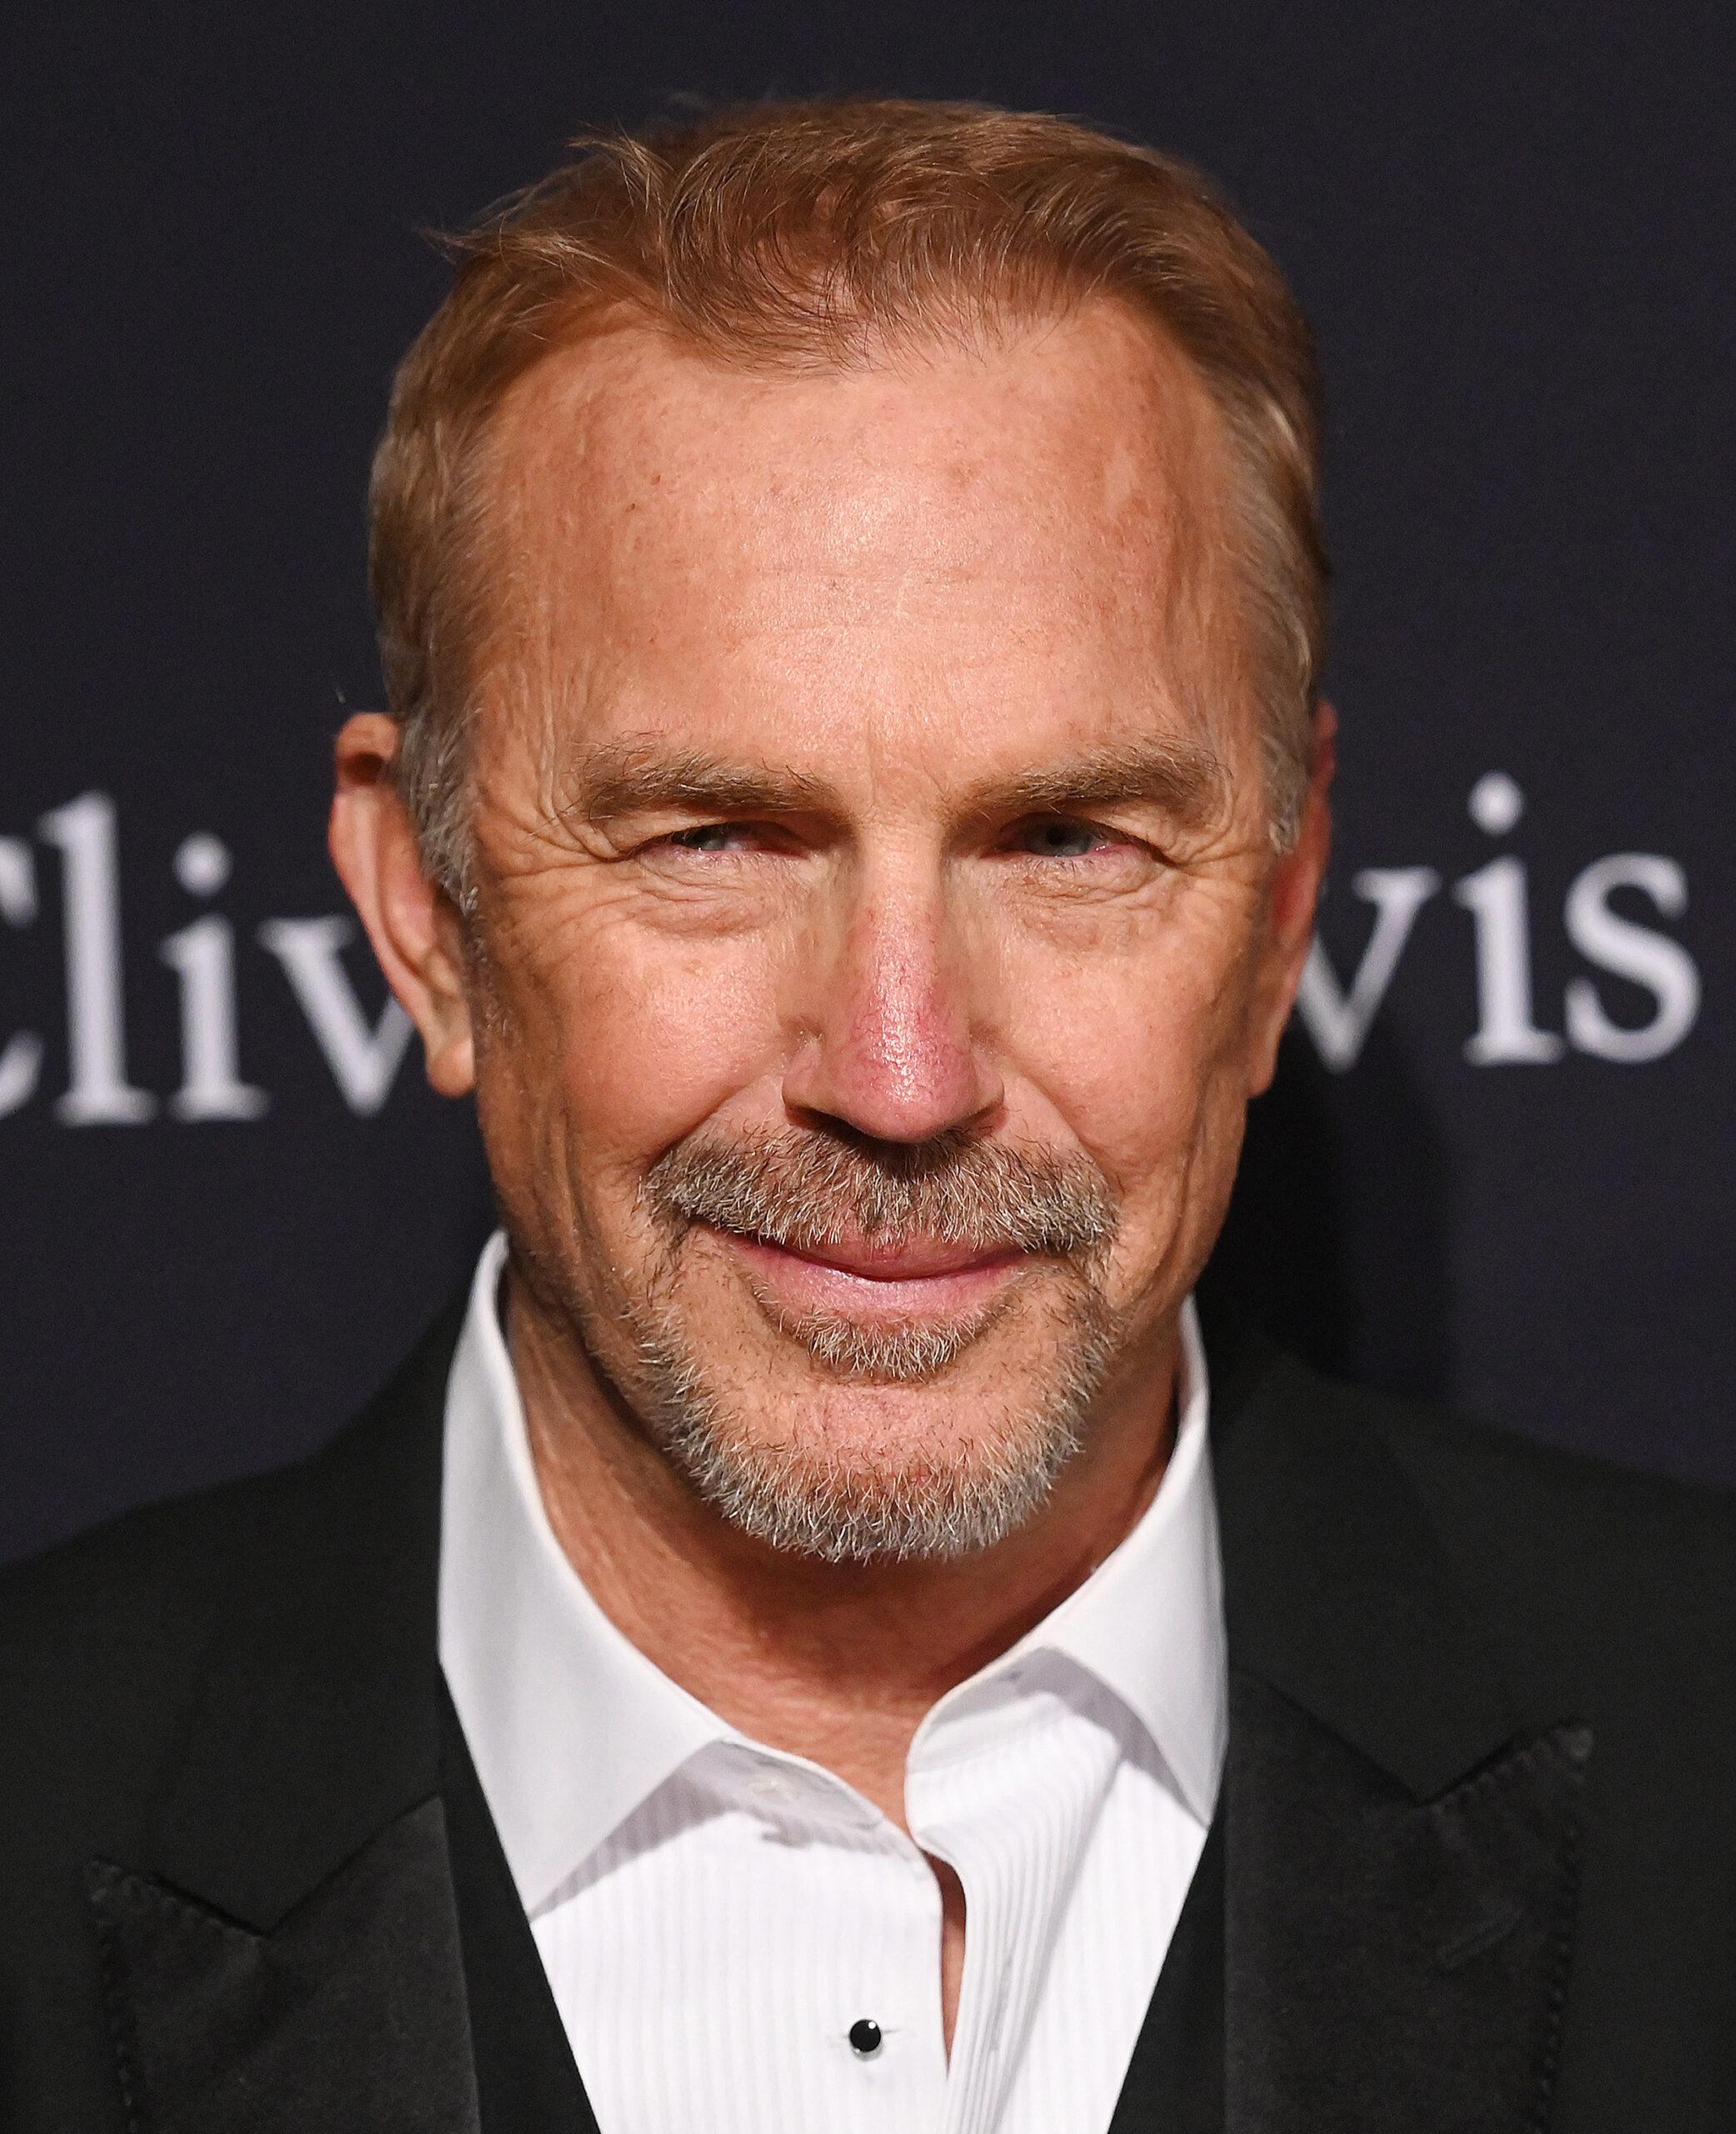 Kevin Costner at the Clive Davis Annual Pre-Grammy Party - Arrivals